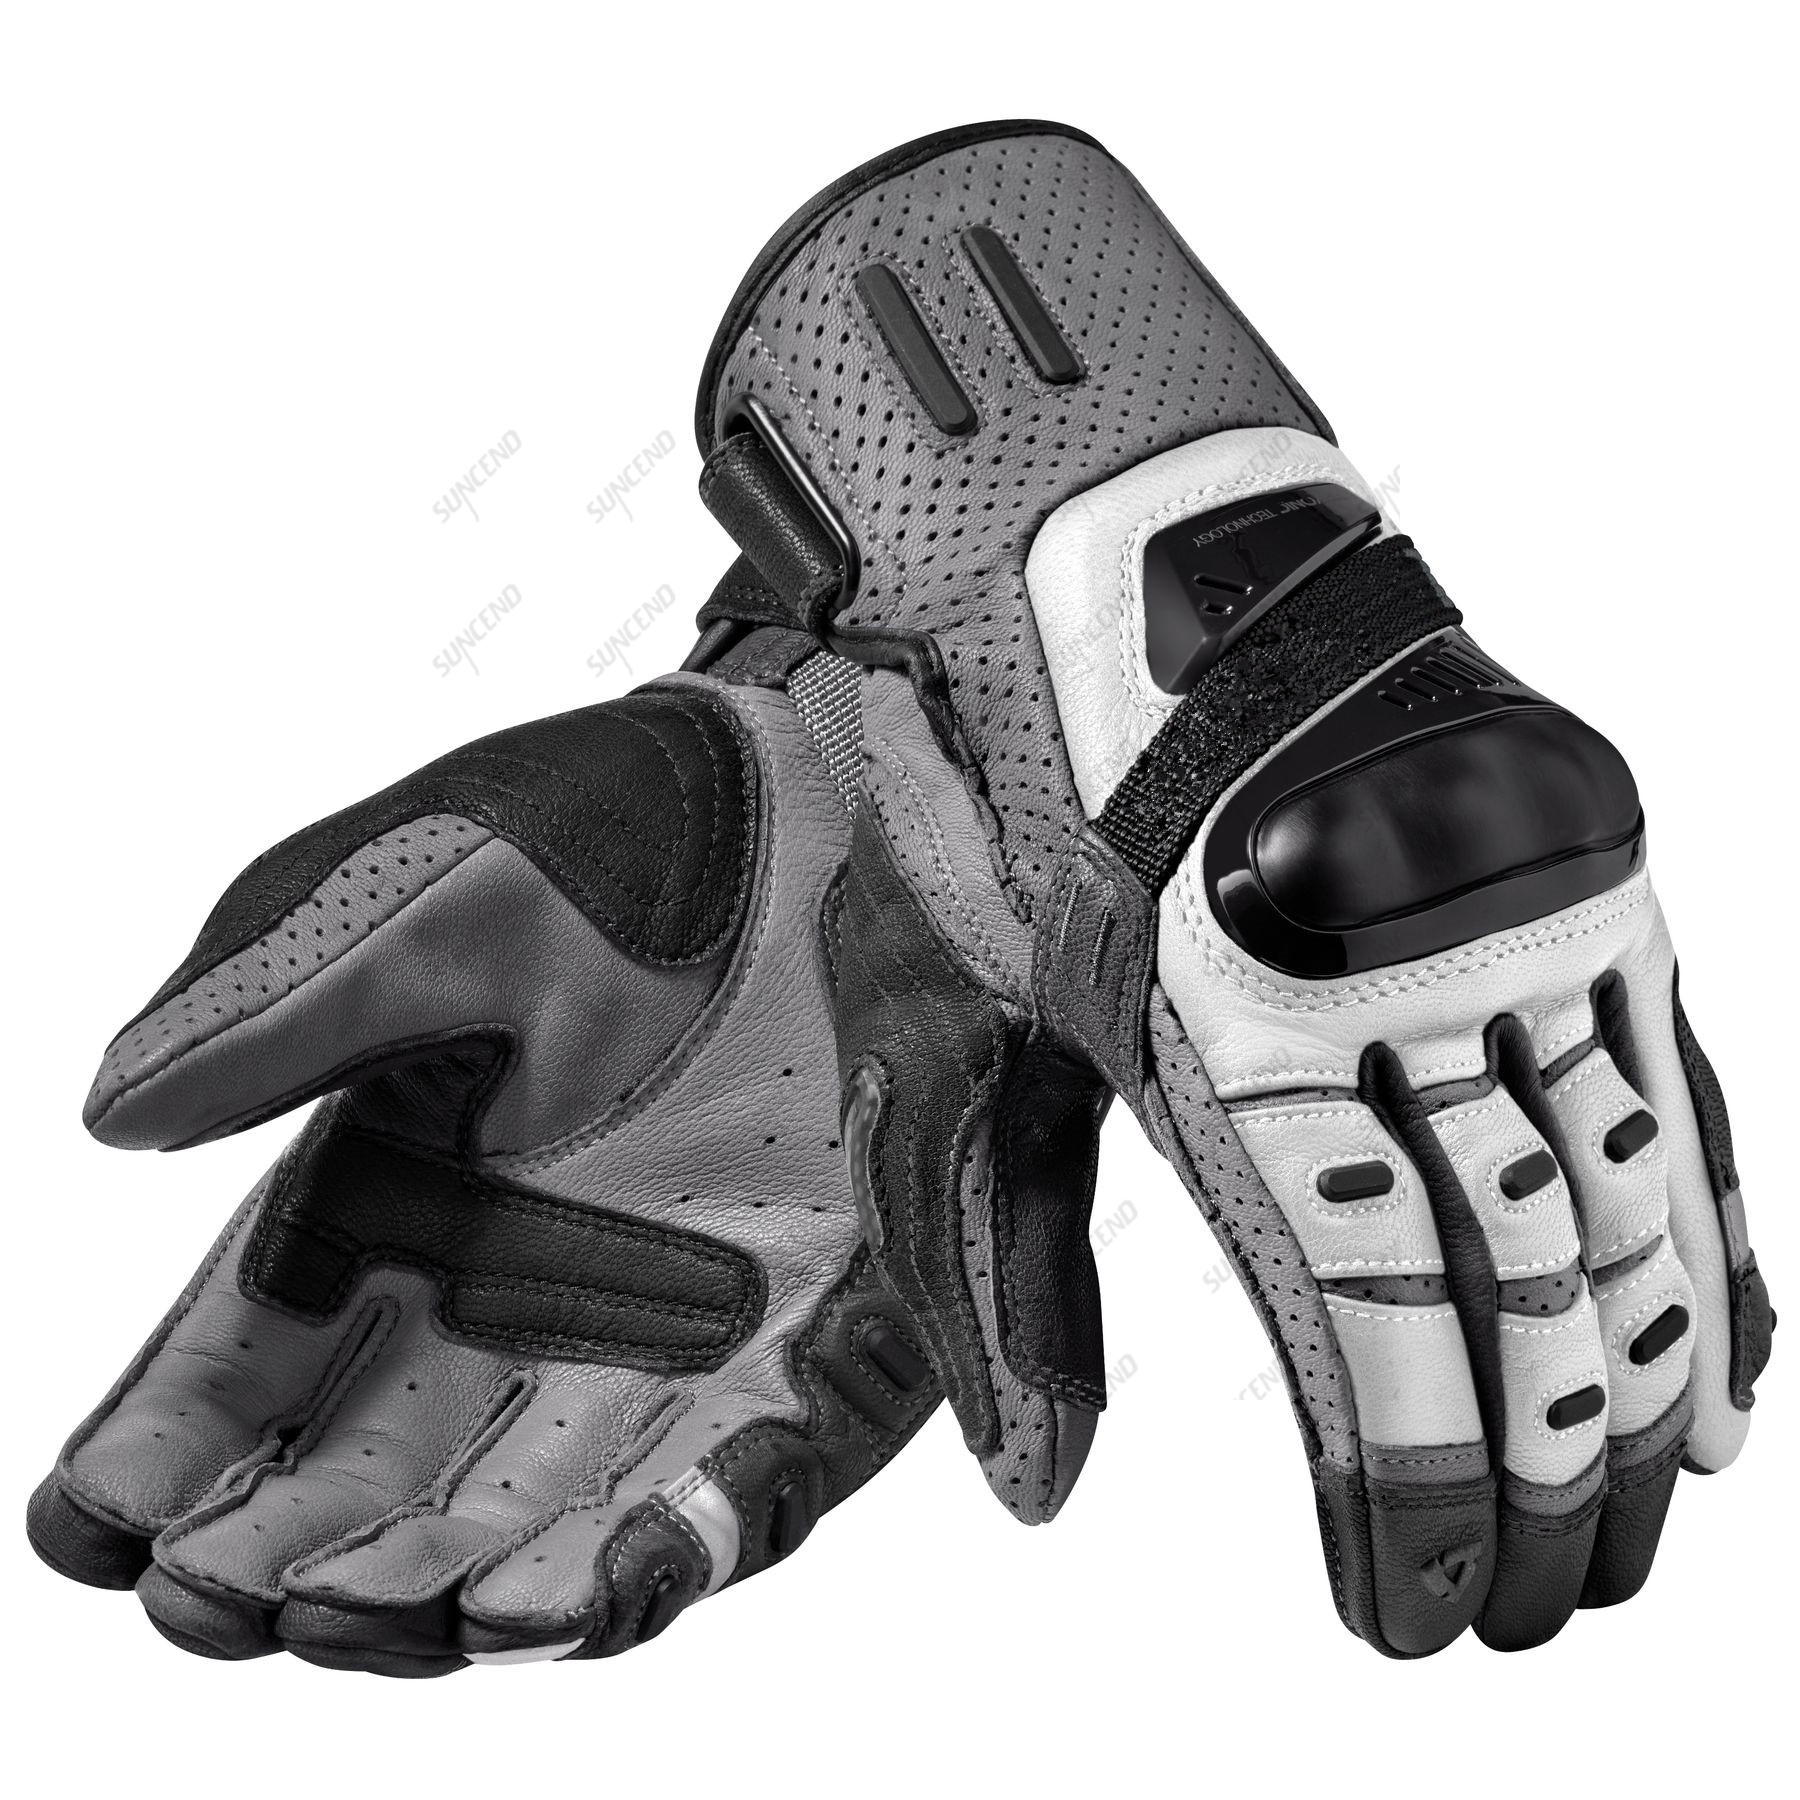 OEM Hand Protection Motorcycle Gloves